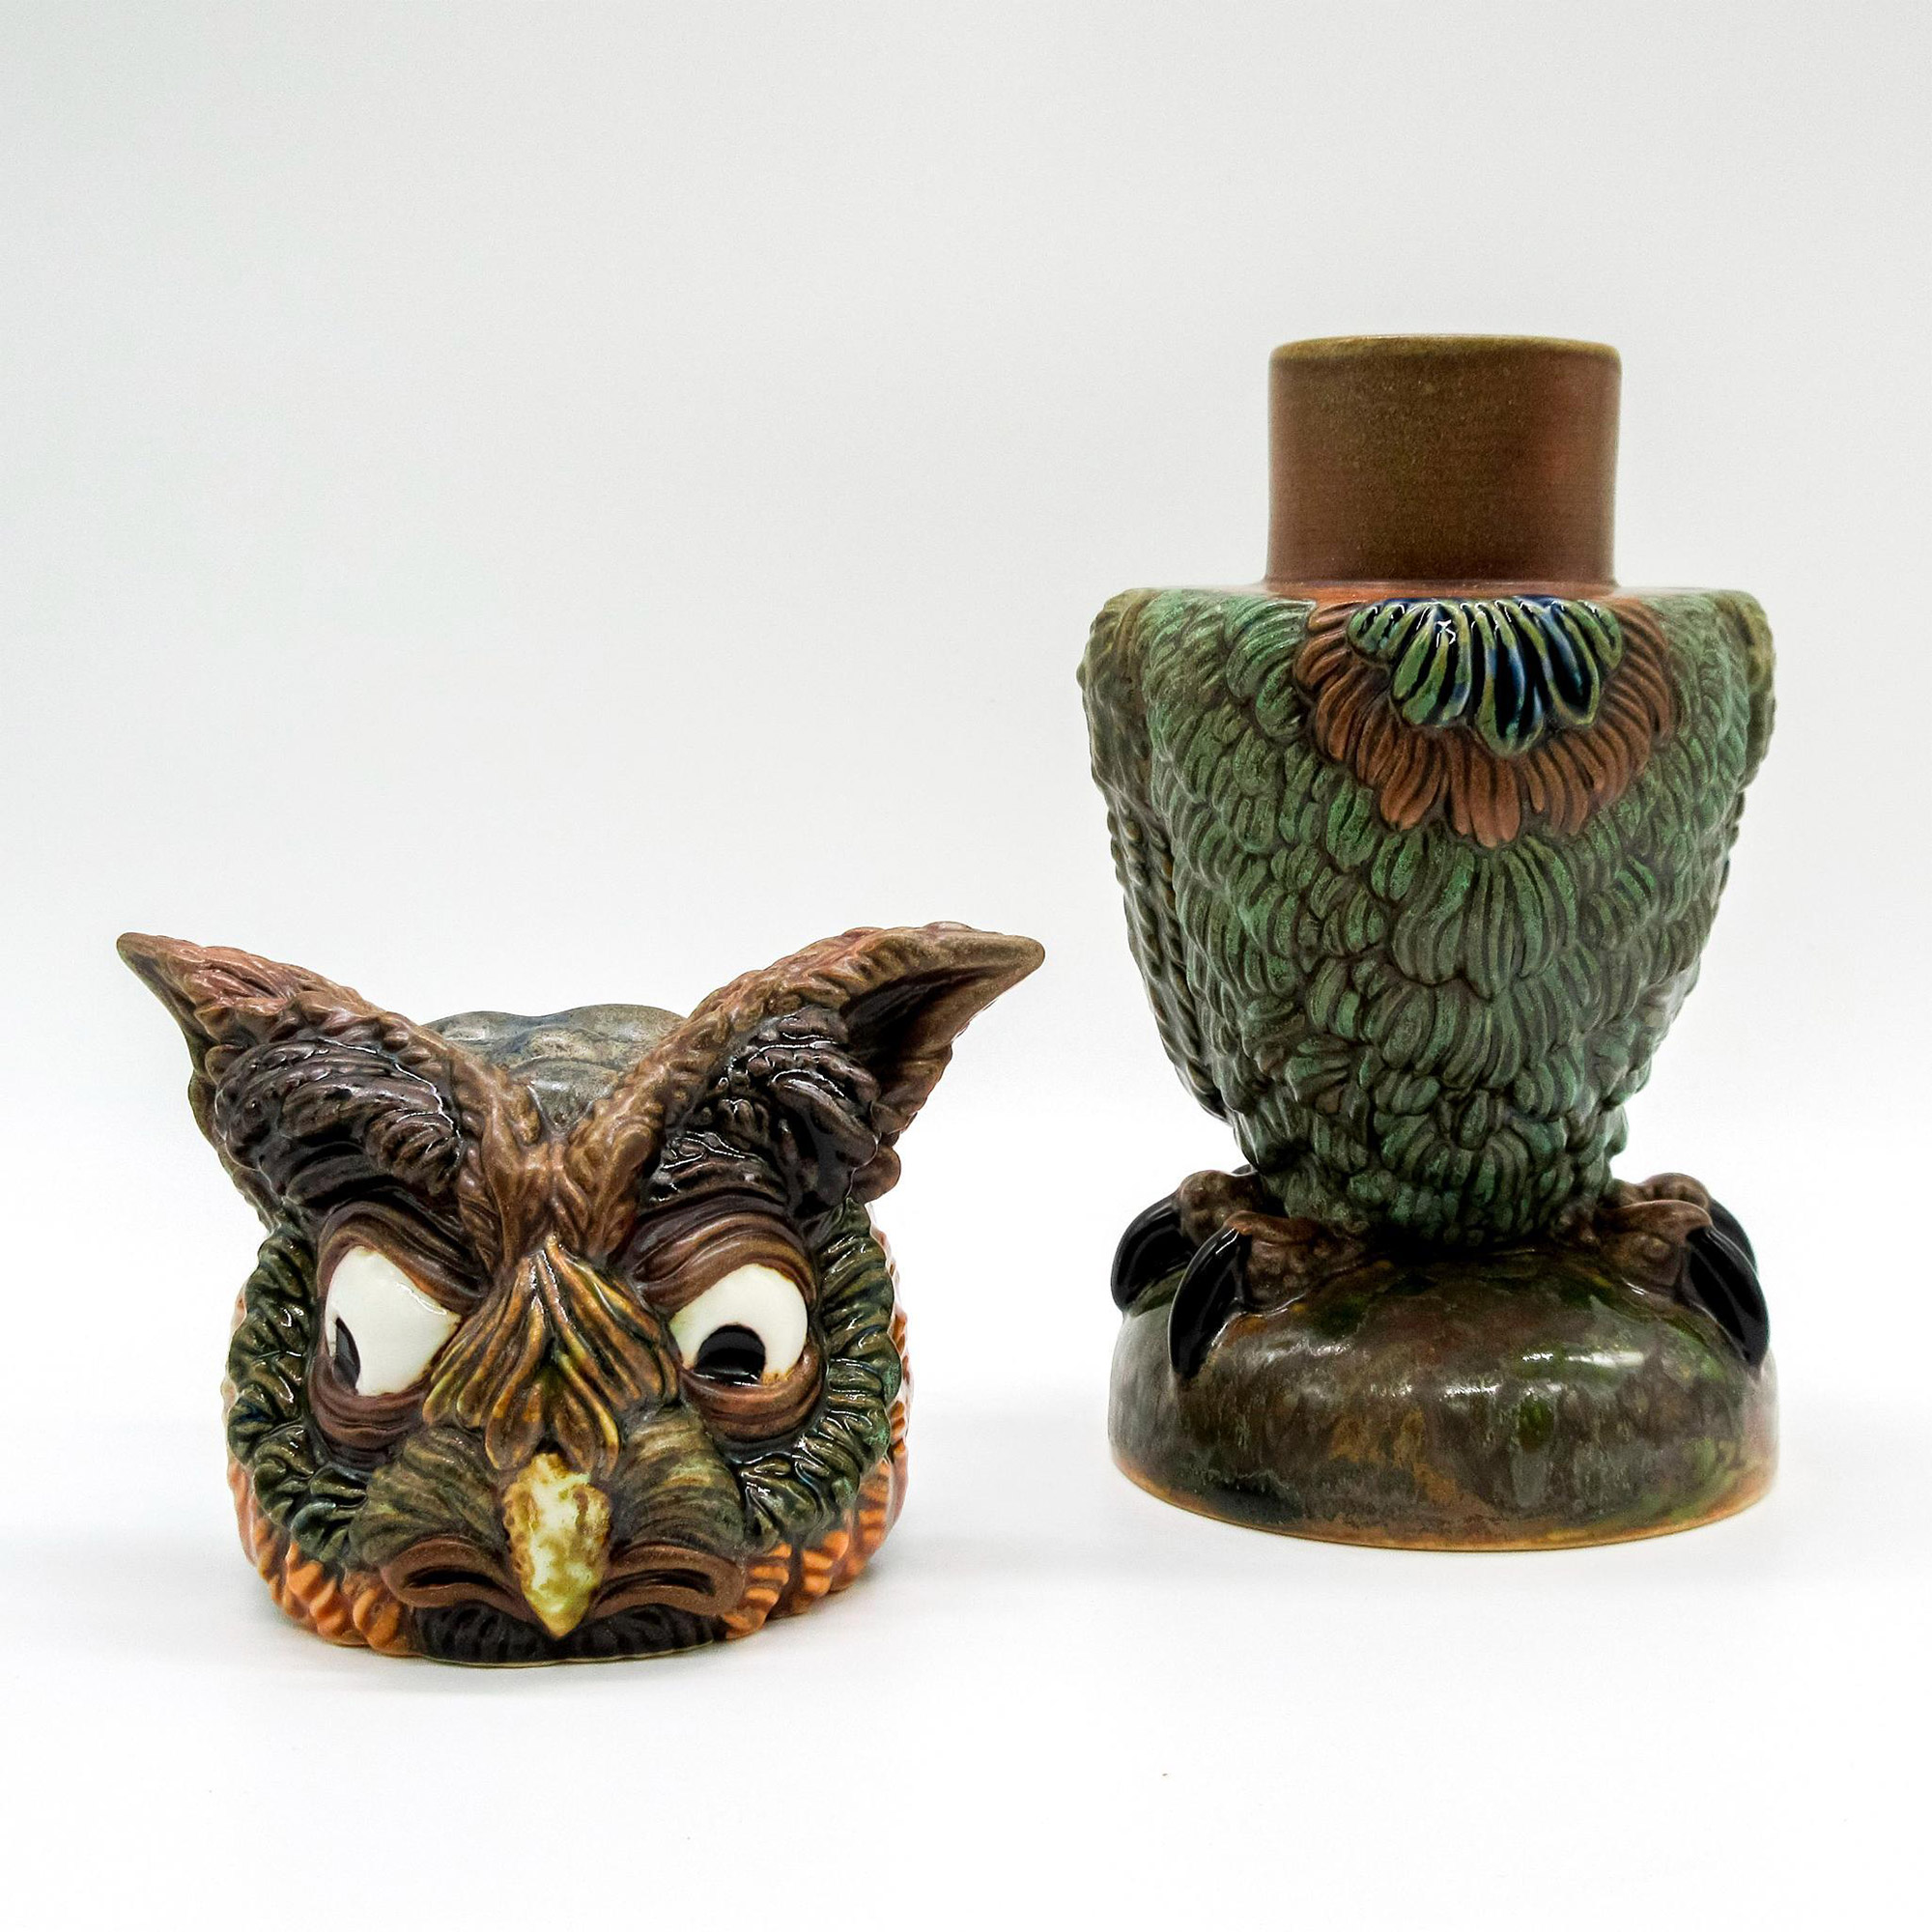 Andrew Hull Pottery Stoneware Figure, Ollie the Owl - Image 5 of 6